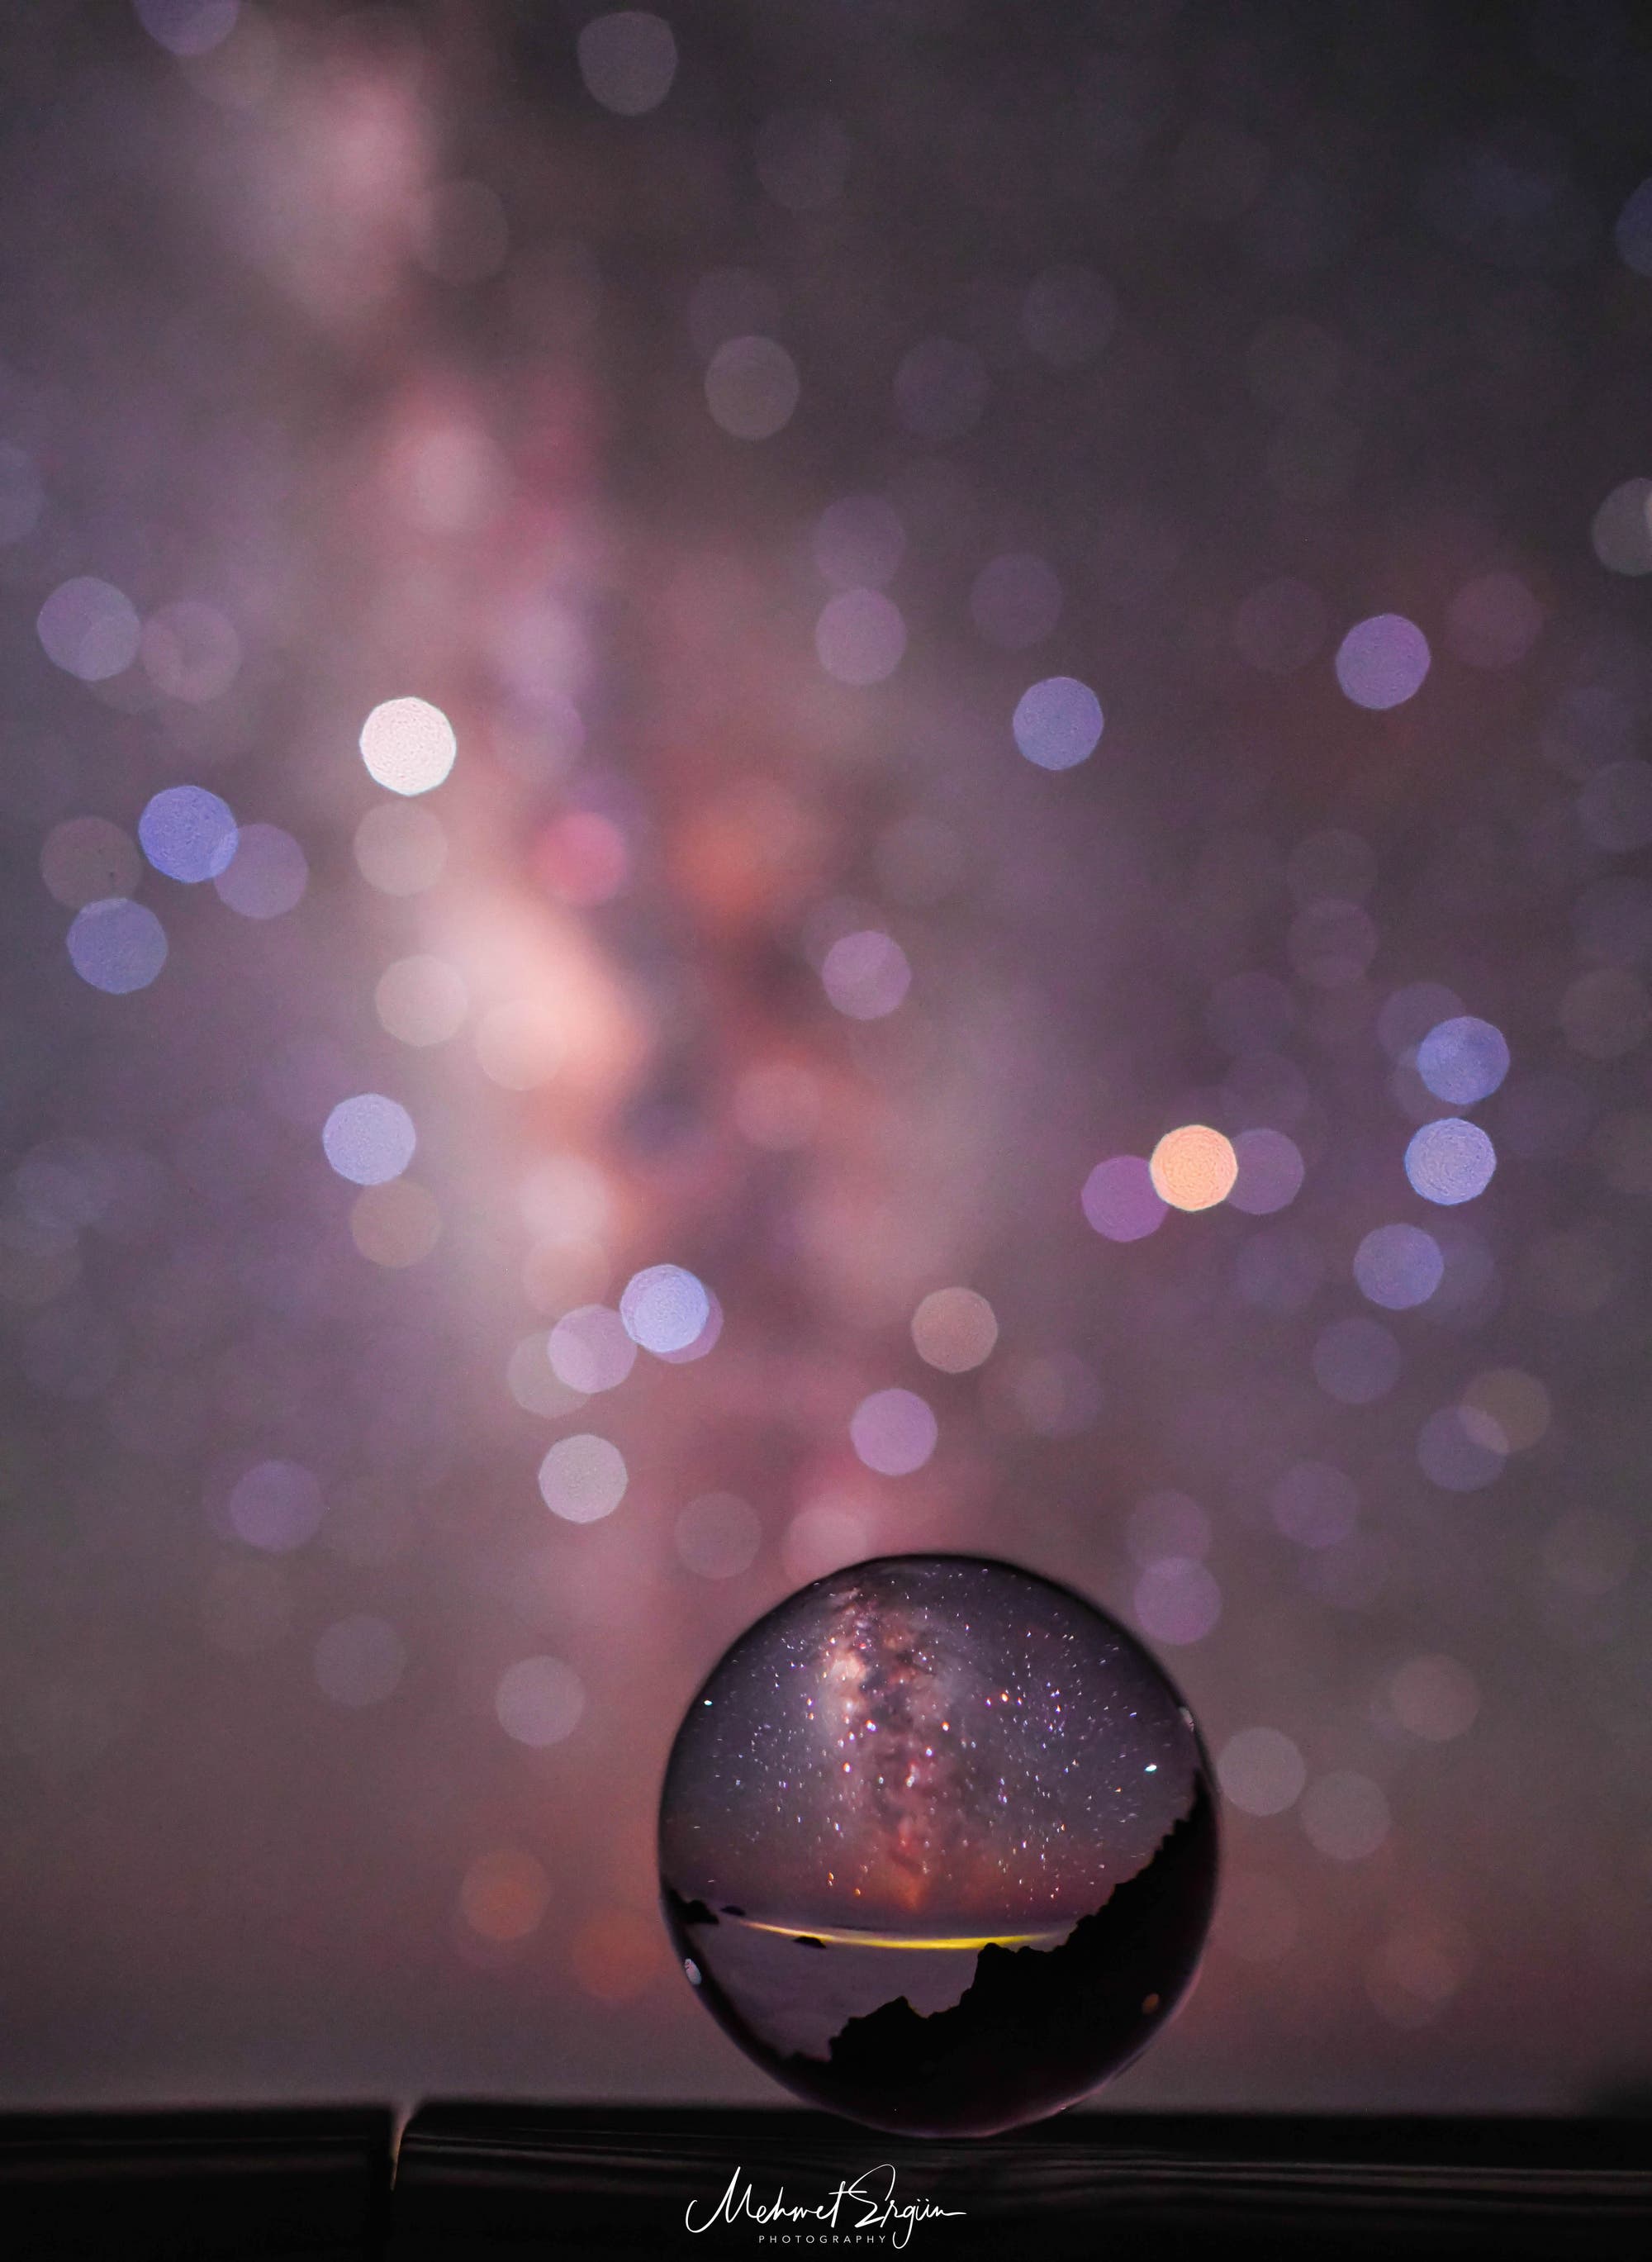 The MilkyWay is in a Lensball